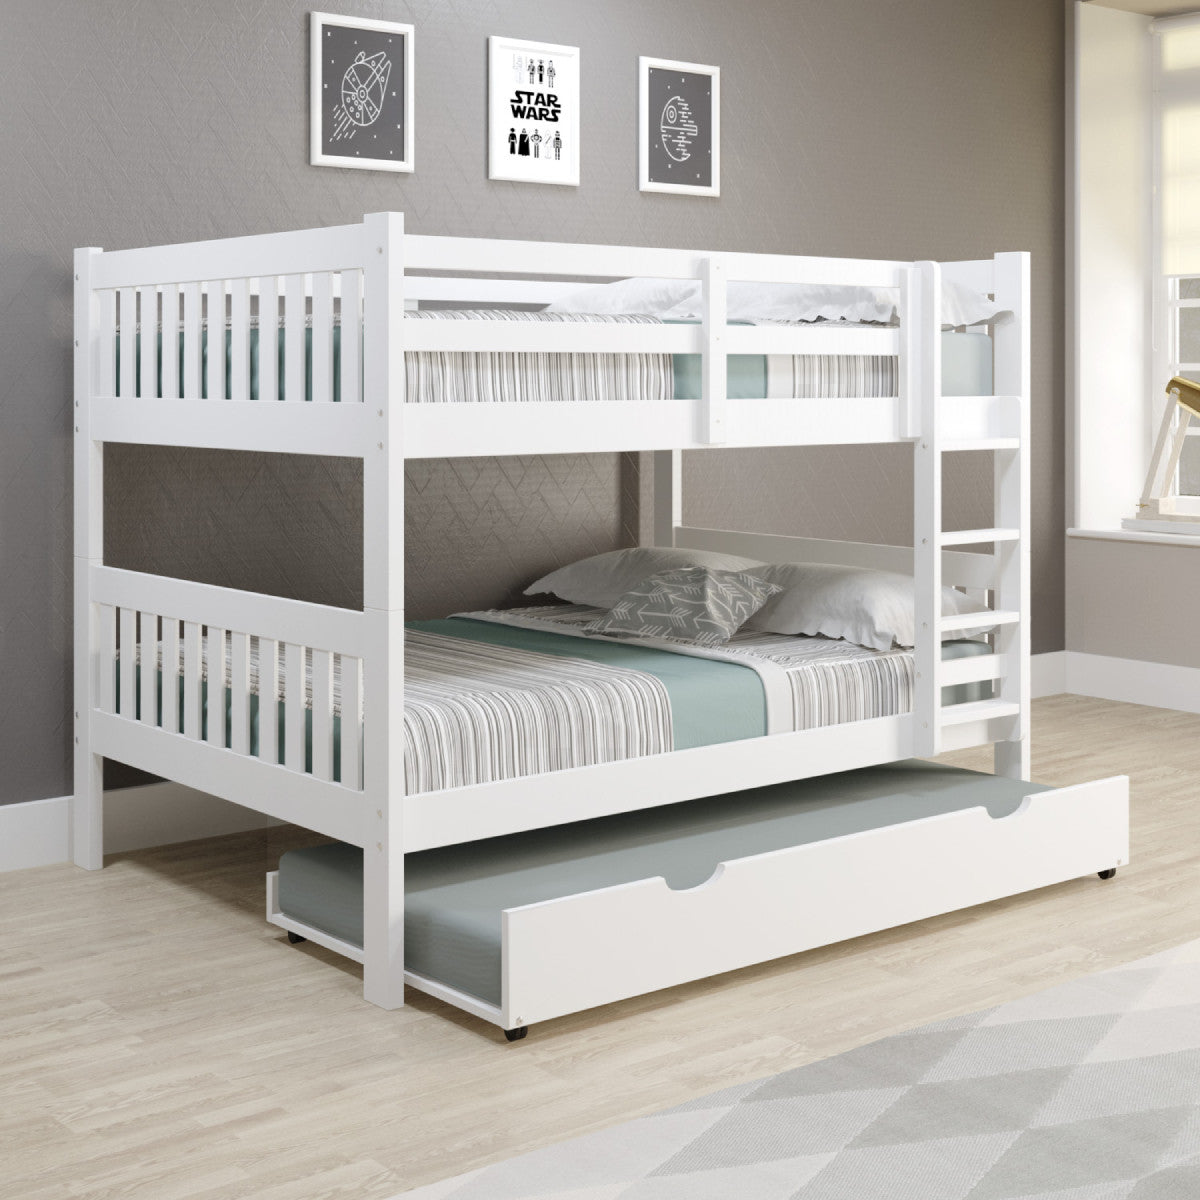 FULL/FULL MISSION BUNK BED W/TWIN TRUNDLE BED IN WHITE FINISH